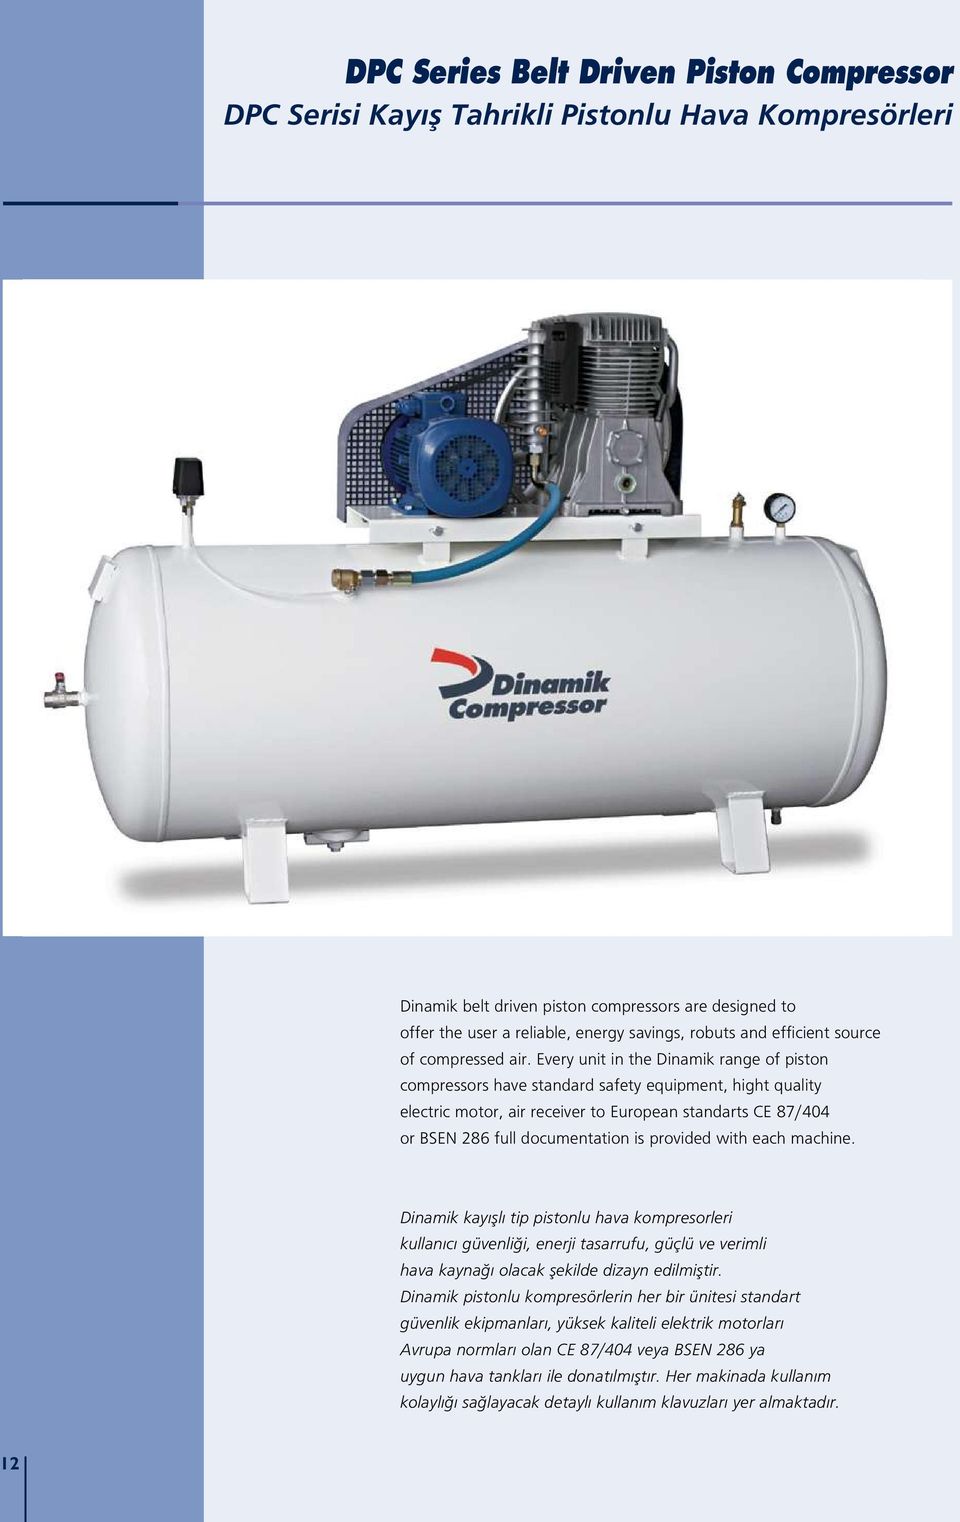 Every unit in the Dinamik range of piston compressors have standard safety equipment, hight quality electric motor, air receiver to European standarts CE 7/404 or BSEN 26 full documentation is